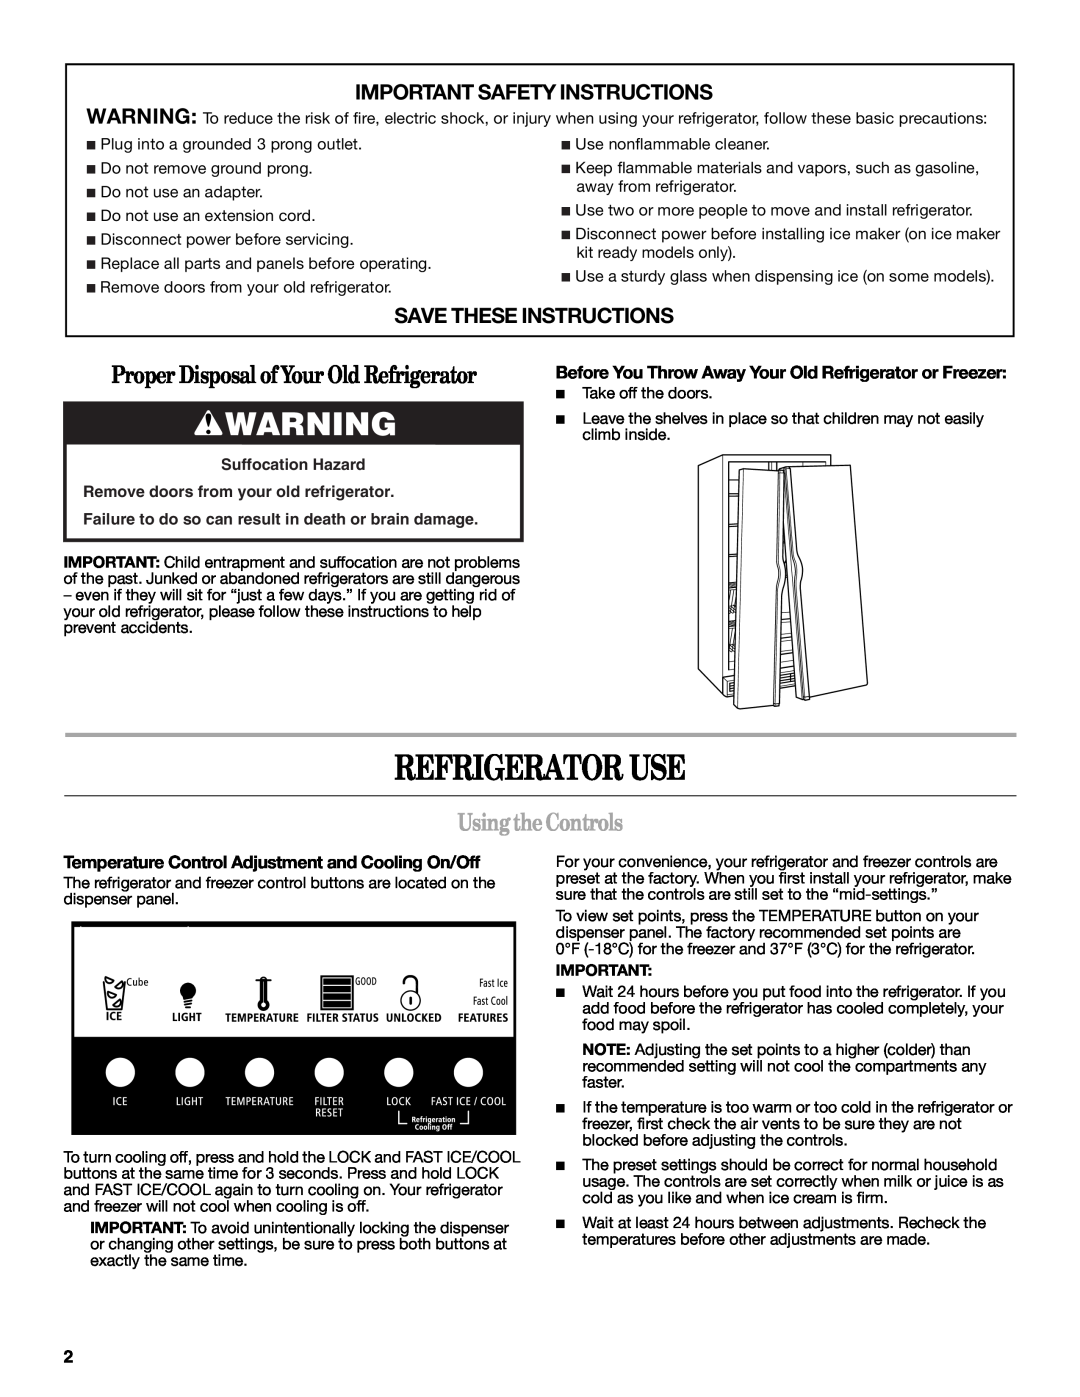 Whirlpool W10189344A warranty Refrigerator Use, Using the Controls, Important Safety Instructions, Save These Instructions 